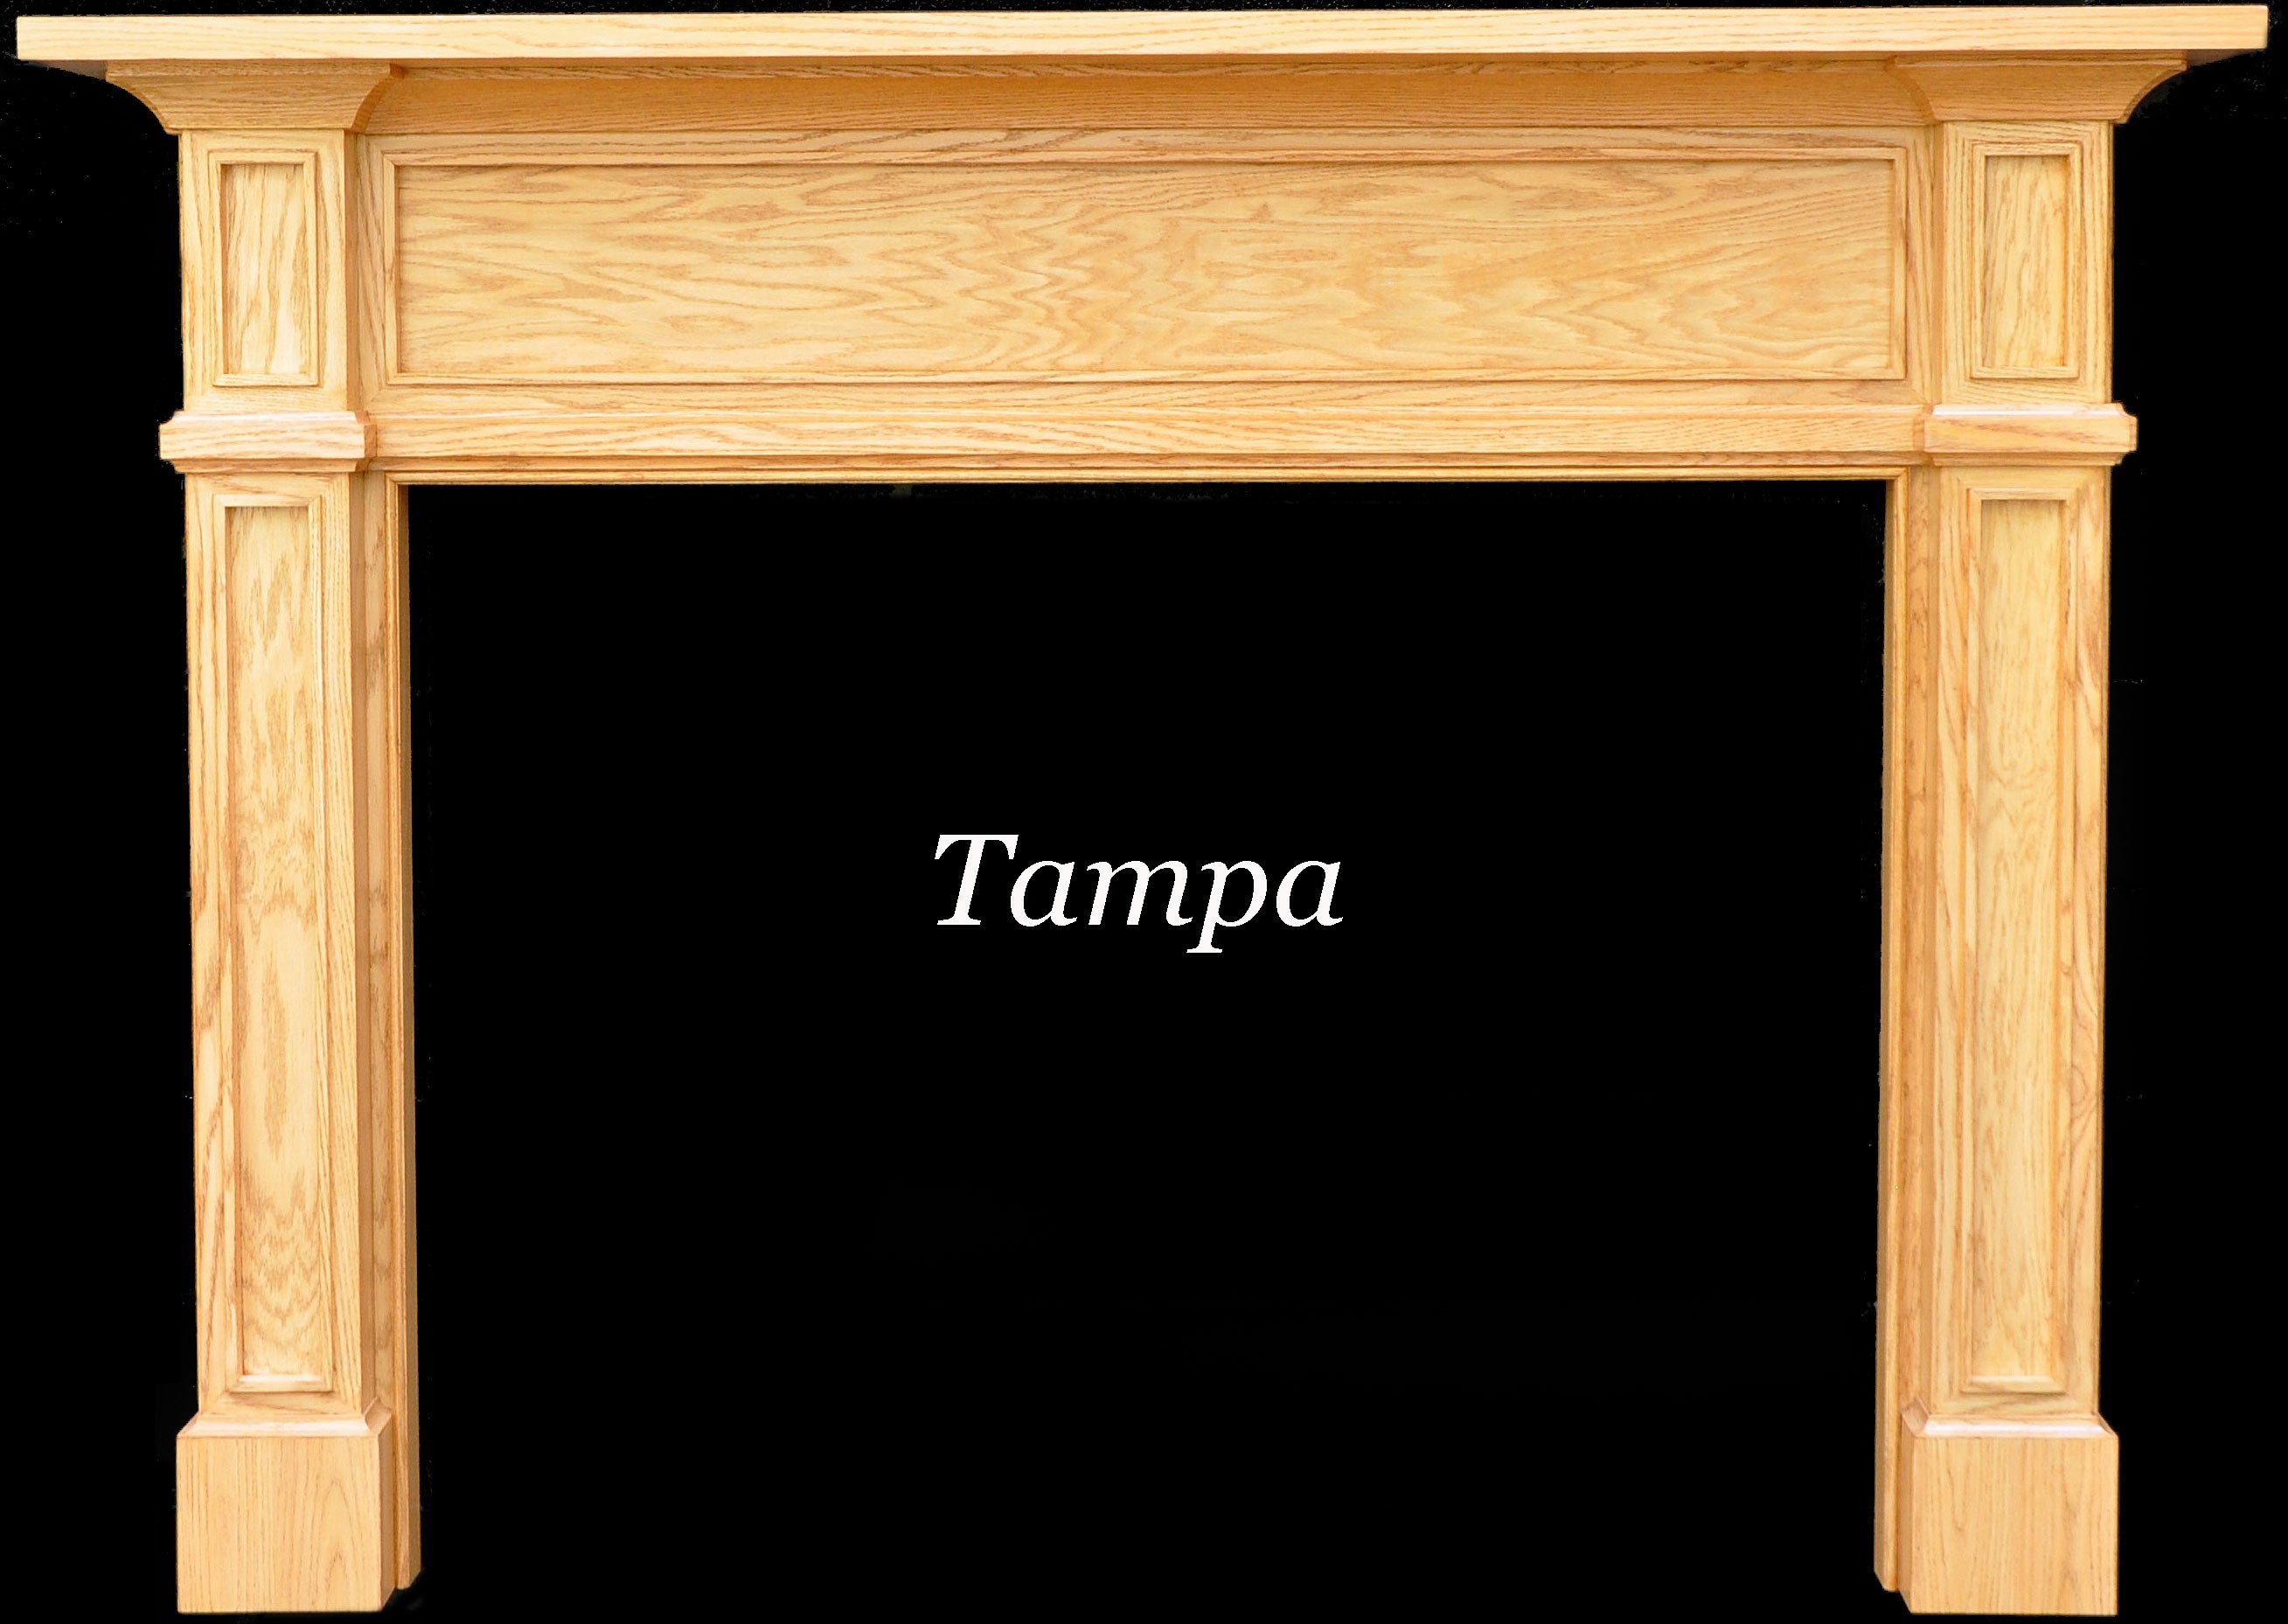 The Tampa Mantel